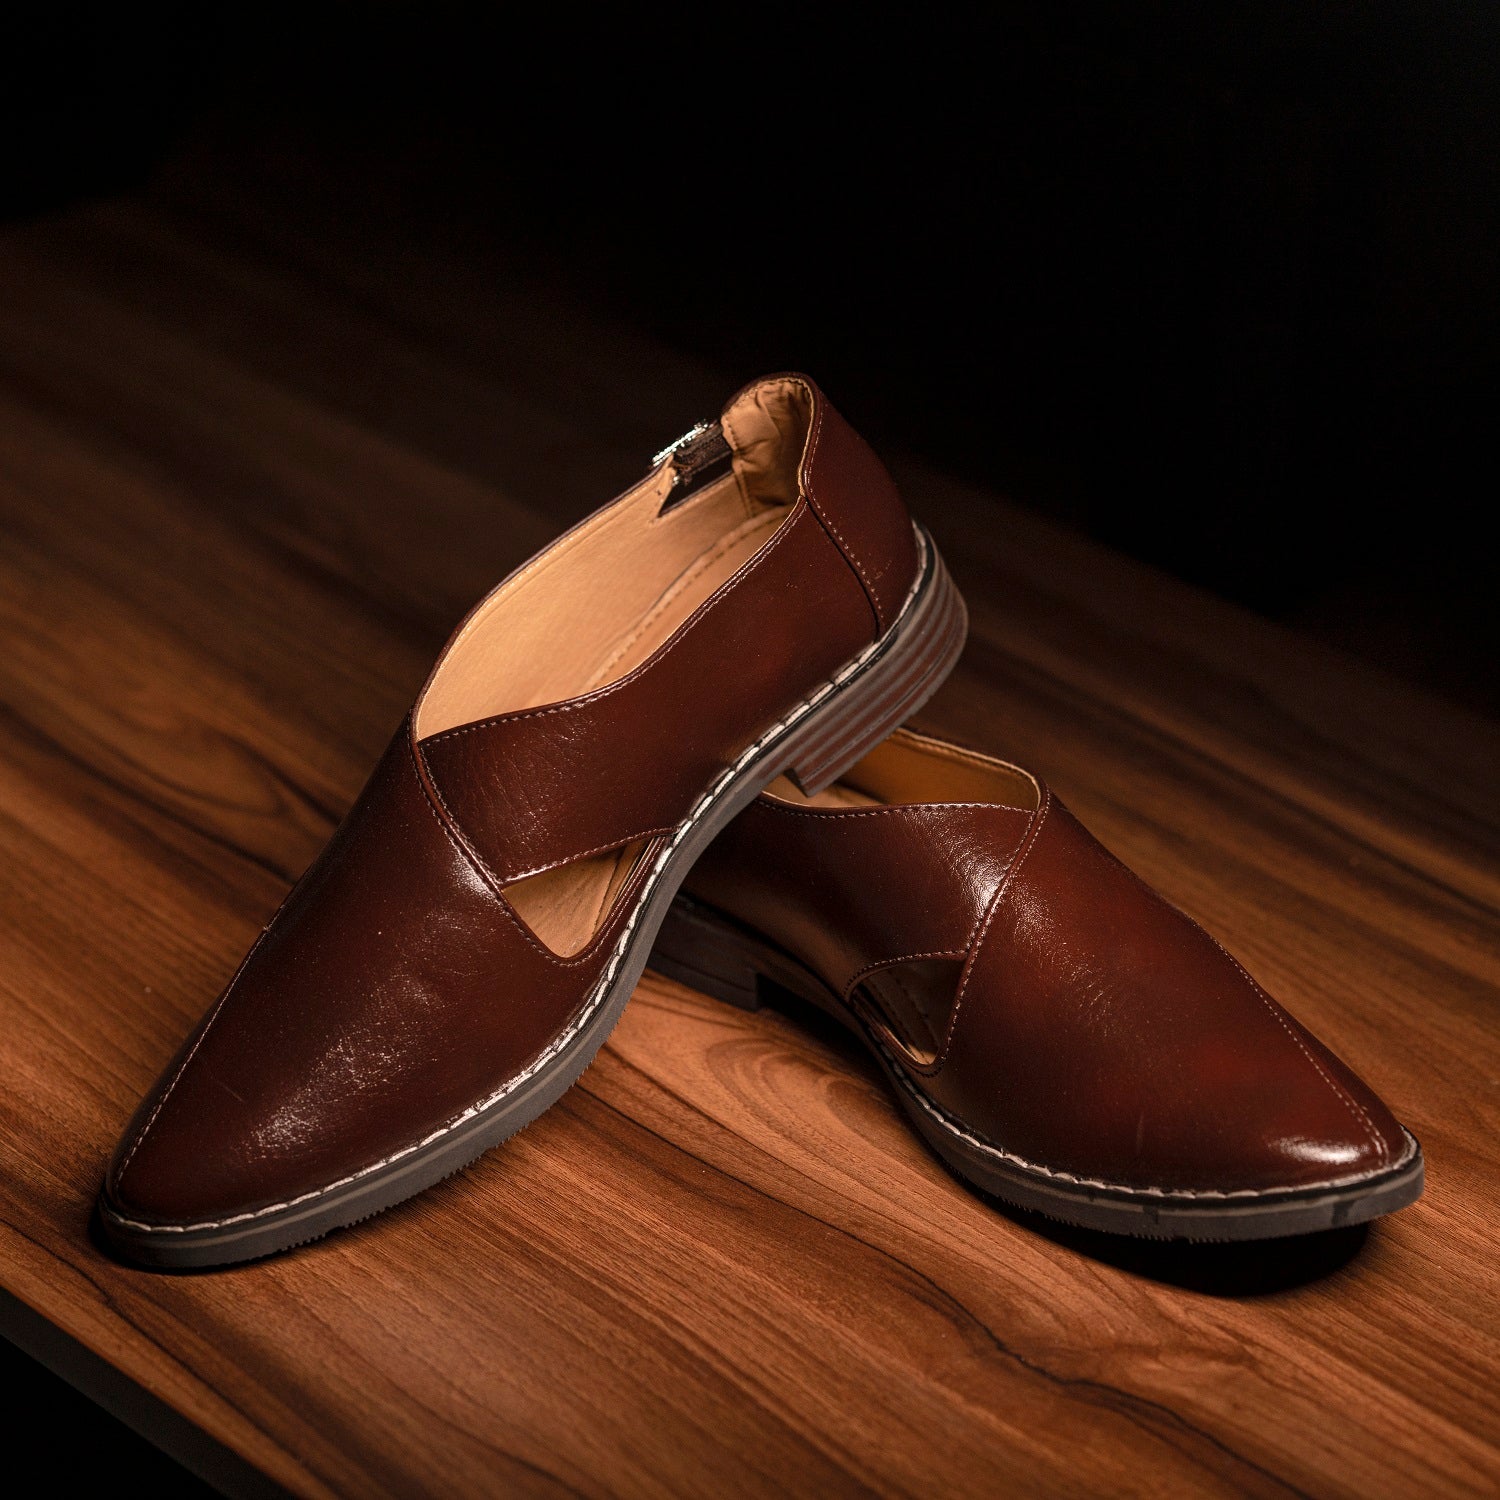 The Aurous Handcrafted Criss Cross Formal Peshawari Shoes - Brown ...